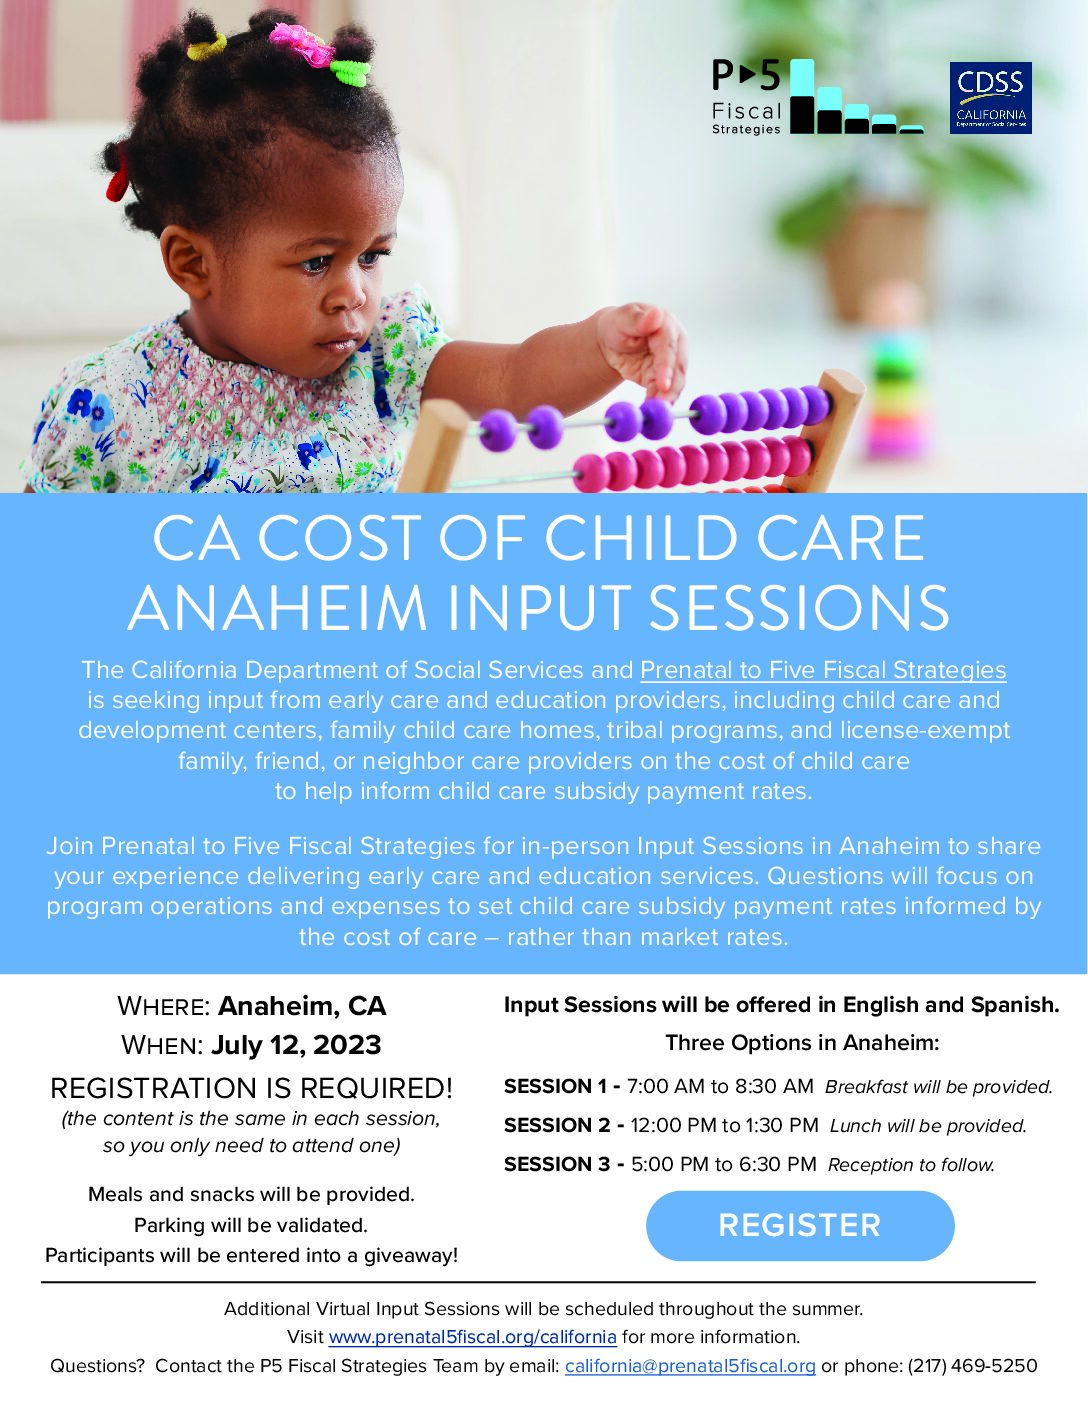 Join the upcoming California cost﻿of child care Anaheim input sessions